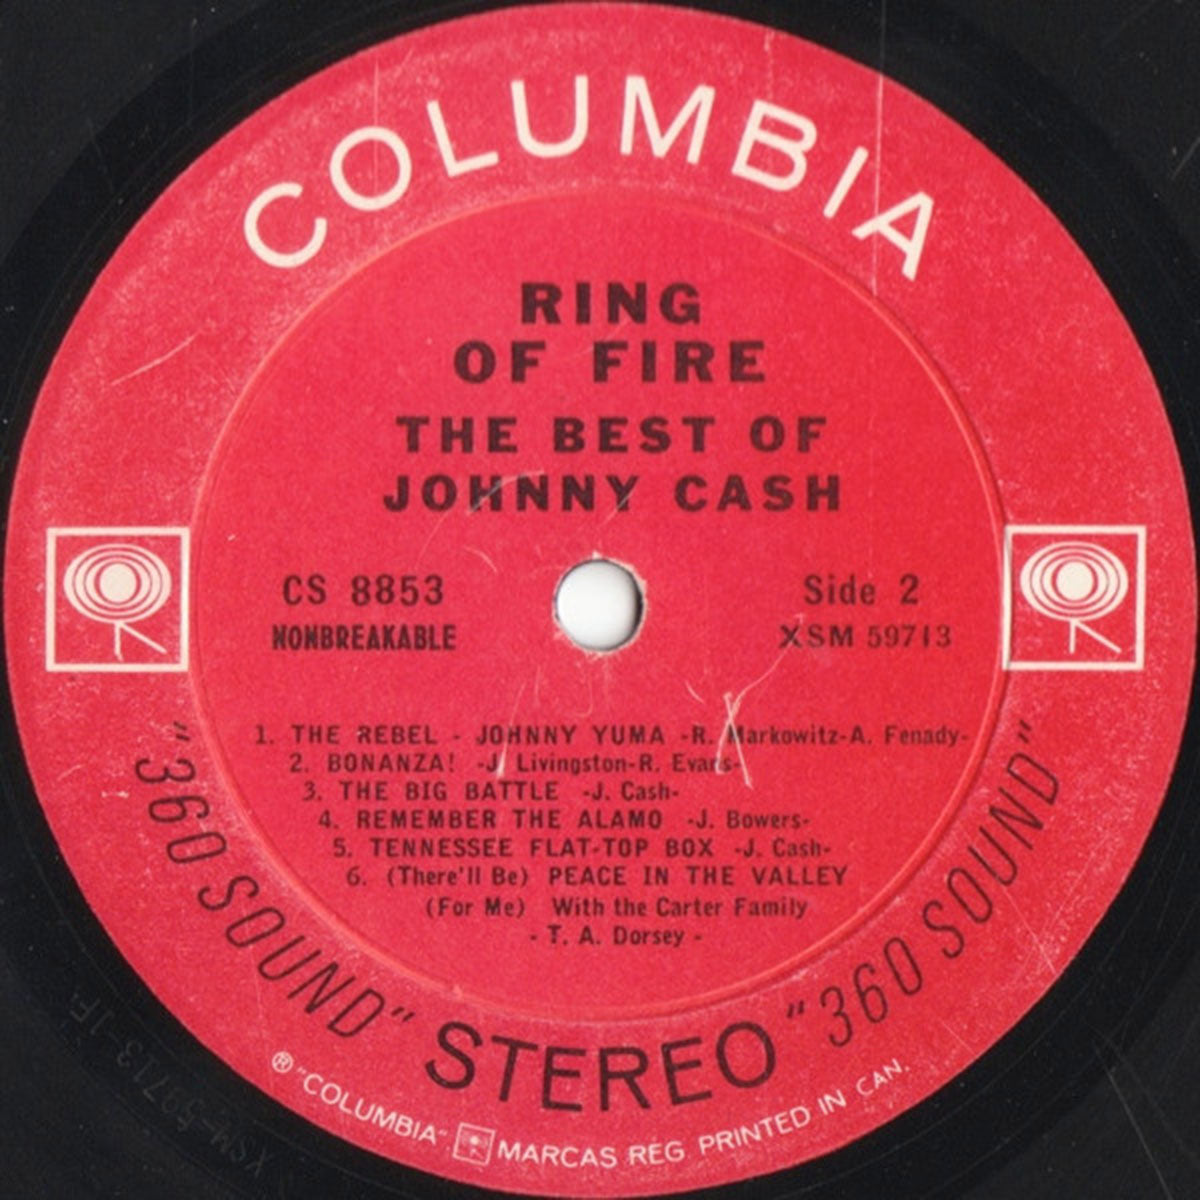 Adopt a Classic - FREE - Johnny Cash – Ring Of Fire - The Best Of Johnny Cash